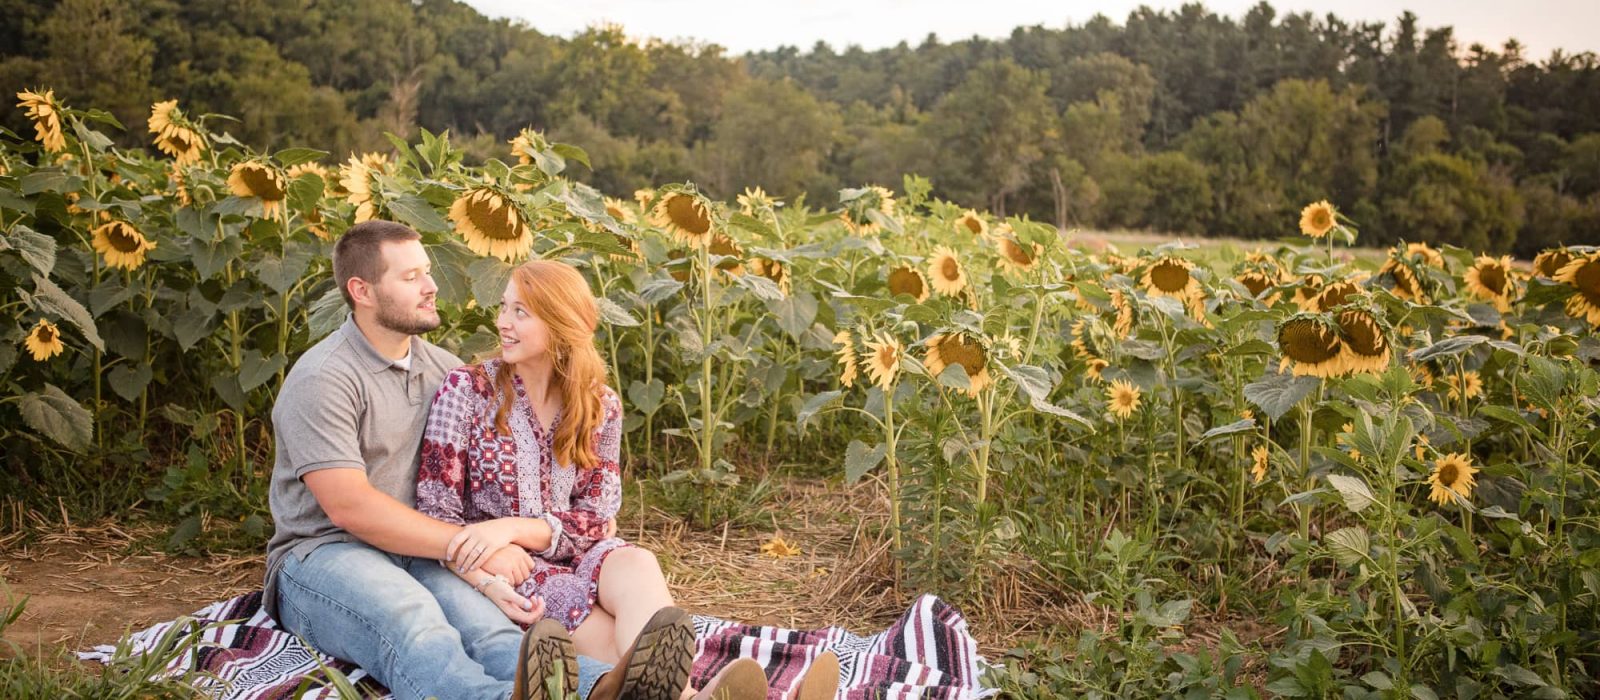 Couple sitting in sunflower field holding hands at Biltmore Estate North Carolina photography done by Kathy Beaver.